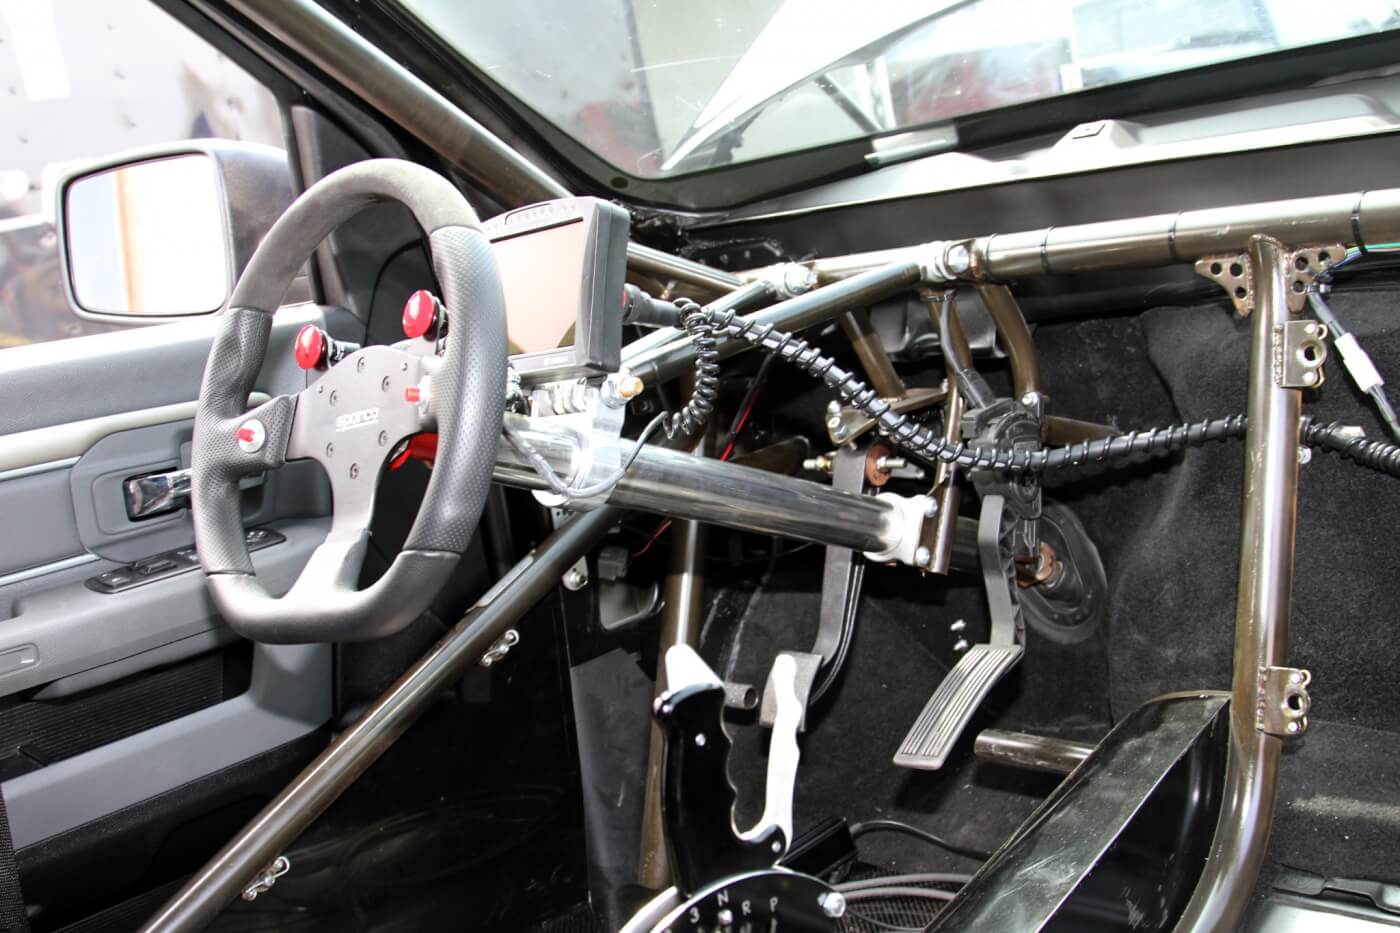 The roll cage provides a solid anchor point for the steering column and pedal assemblies. Milliken has a great view of the engine vitals with the Bosch Motorsport Display mounted in front of the Sparco steering wheel.